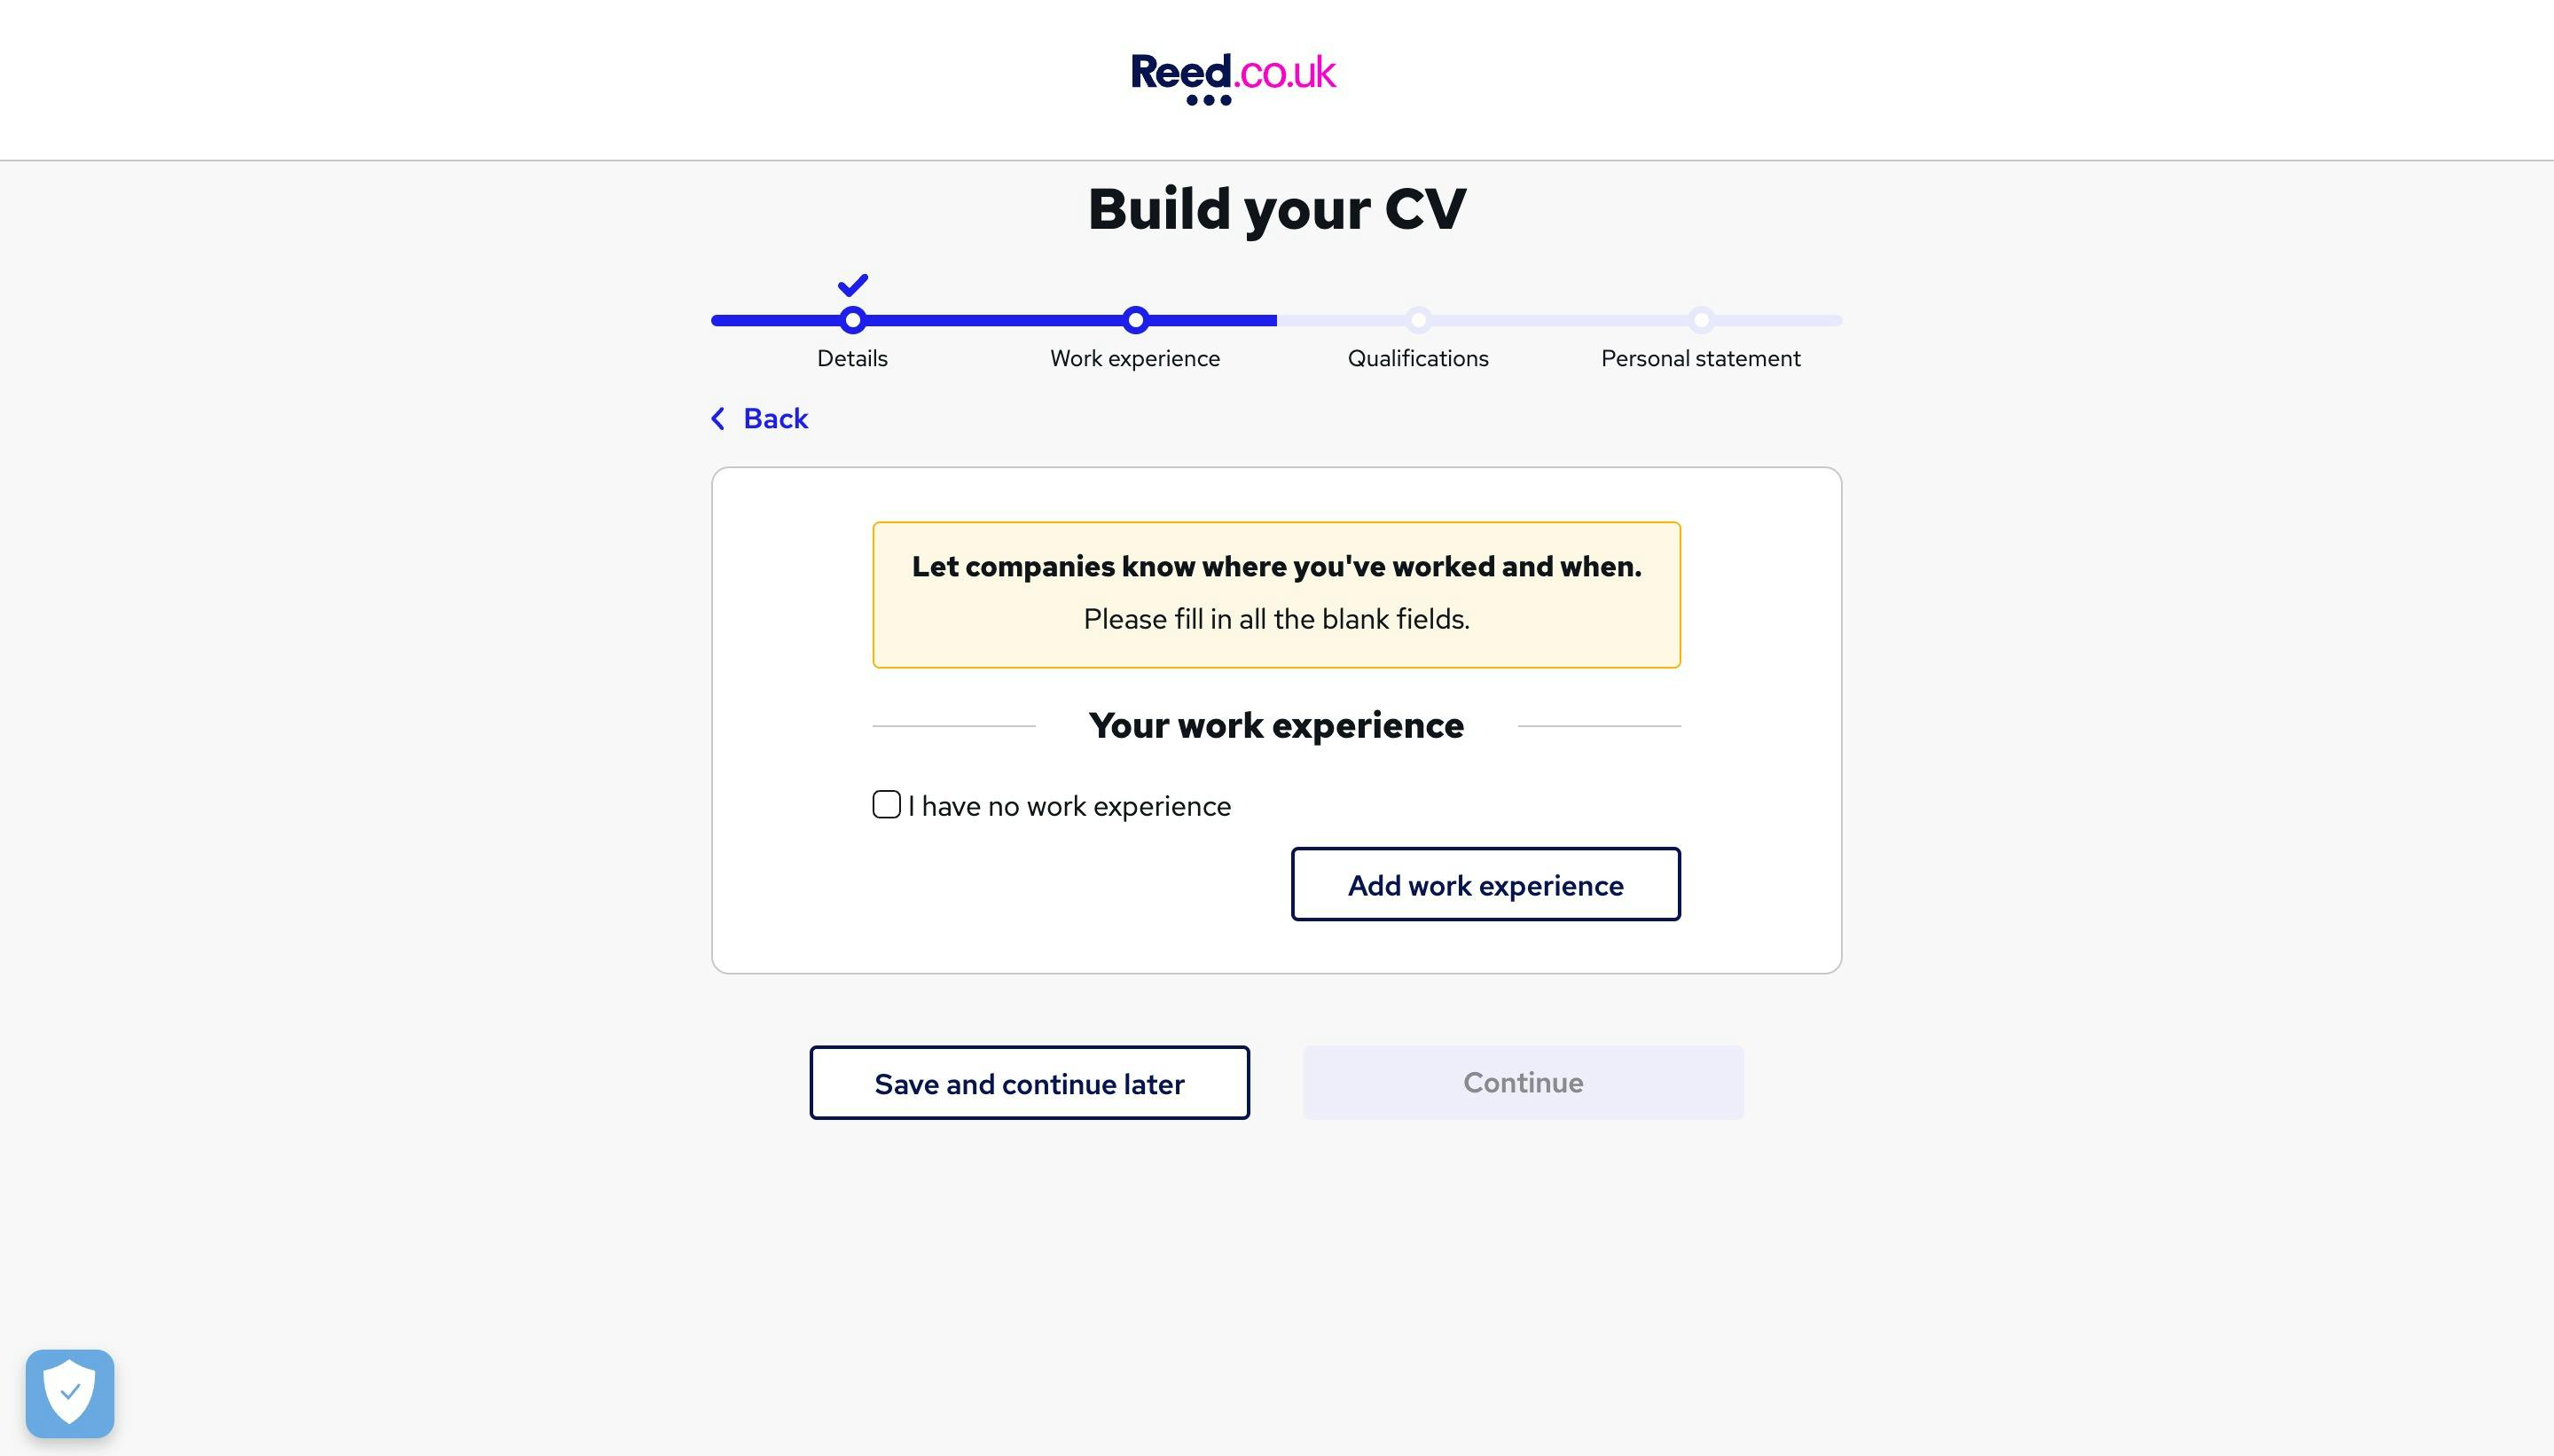 Adding work experience to your Reed.co.uk CV